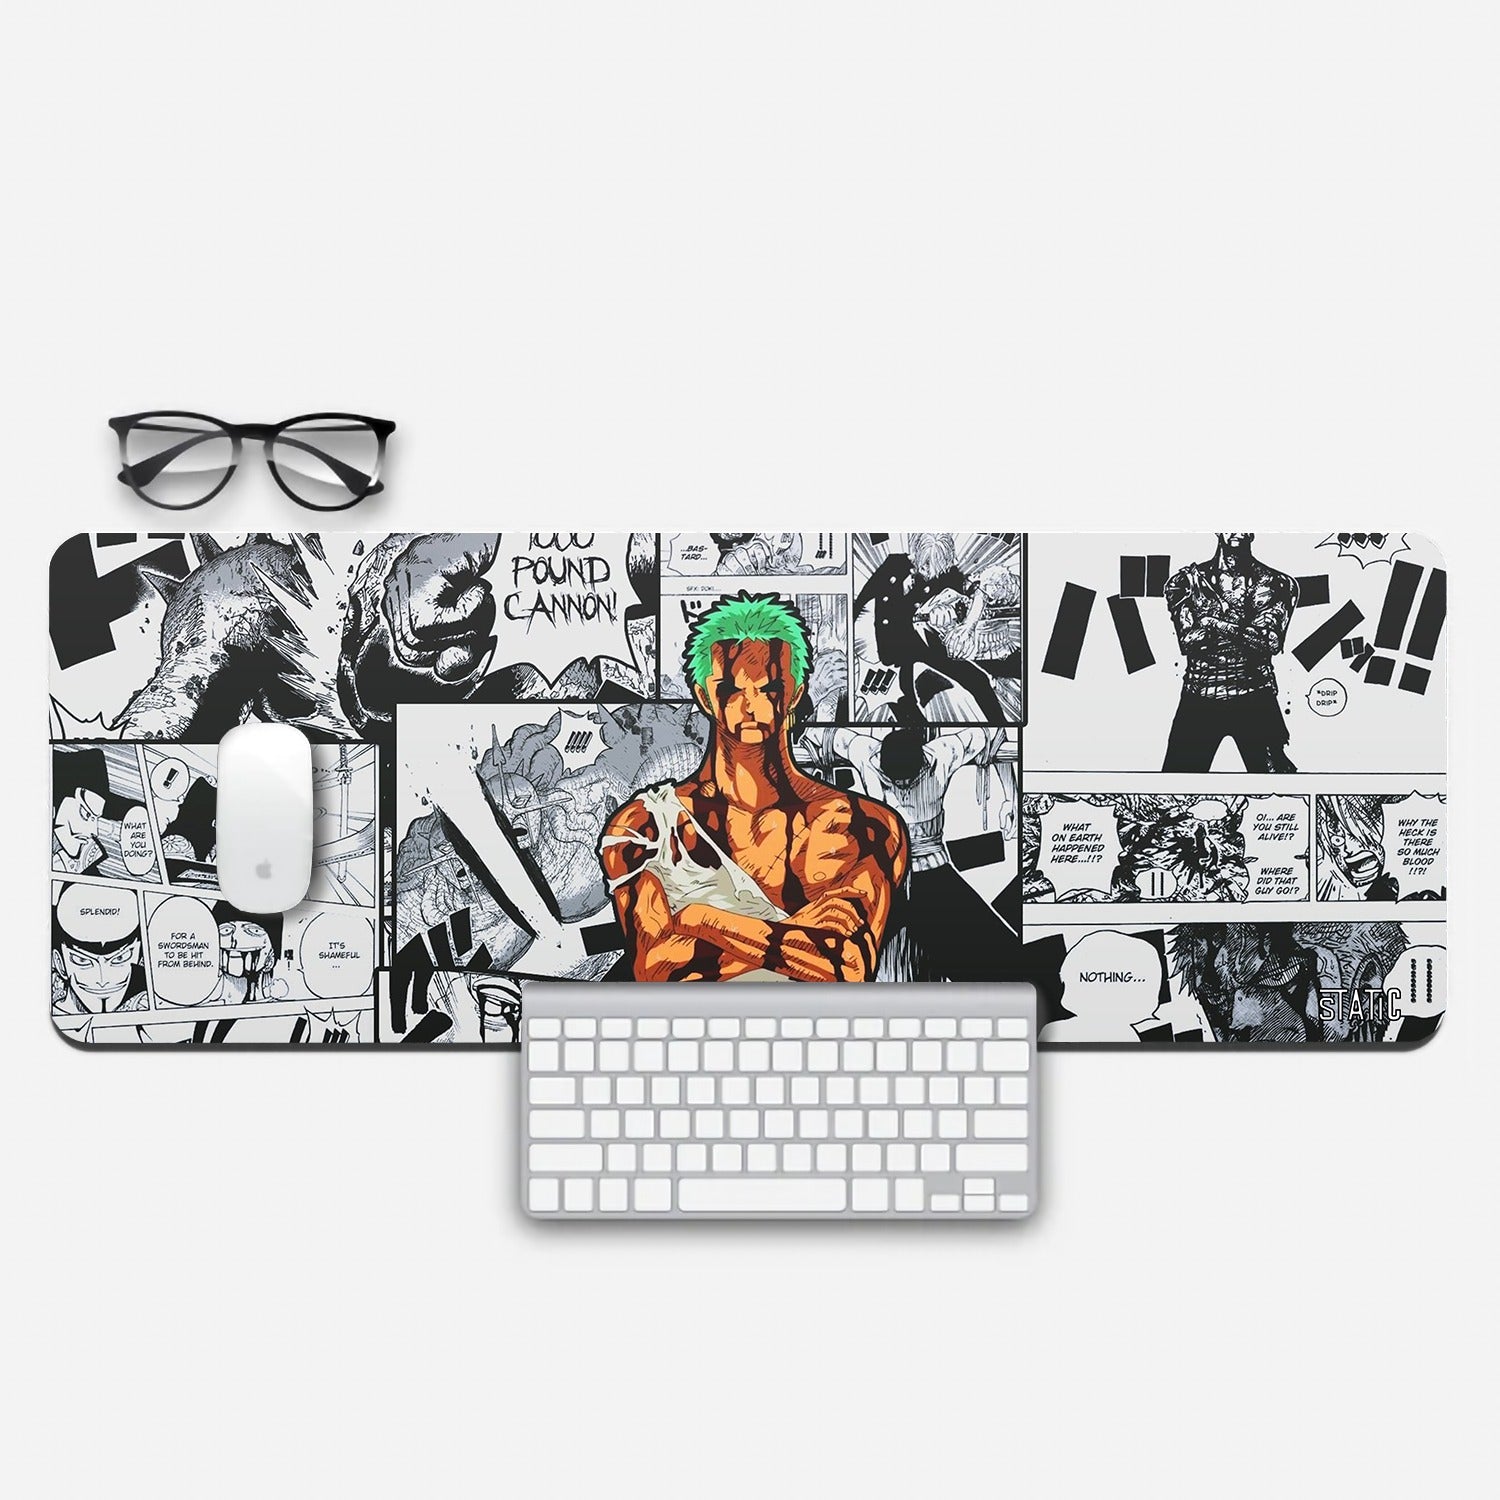 One Piece Gang Manga Collage Mouse Pad Gaming Mouse Pad – Anime